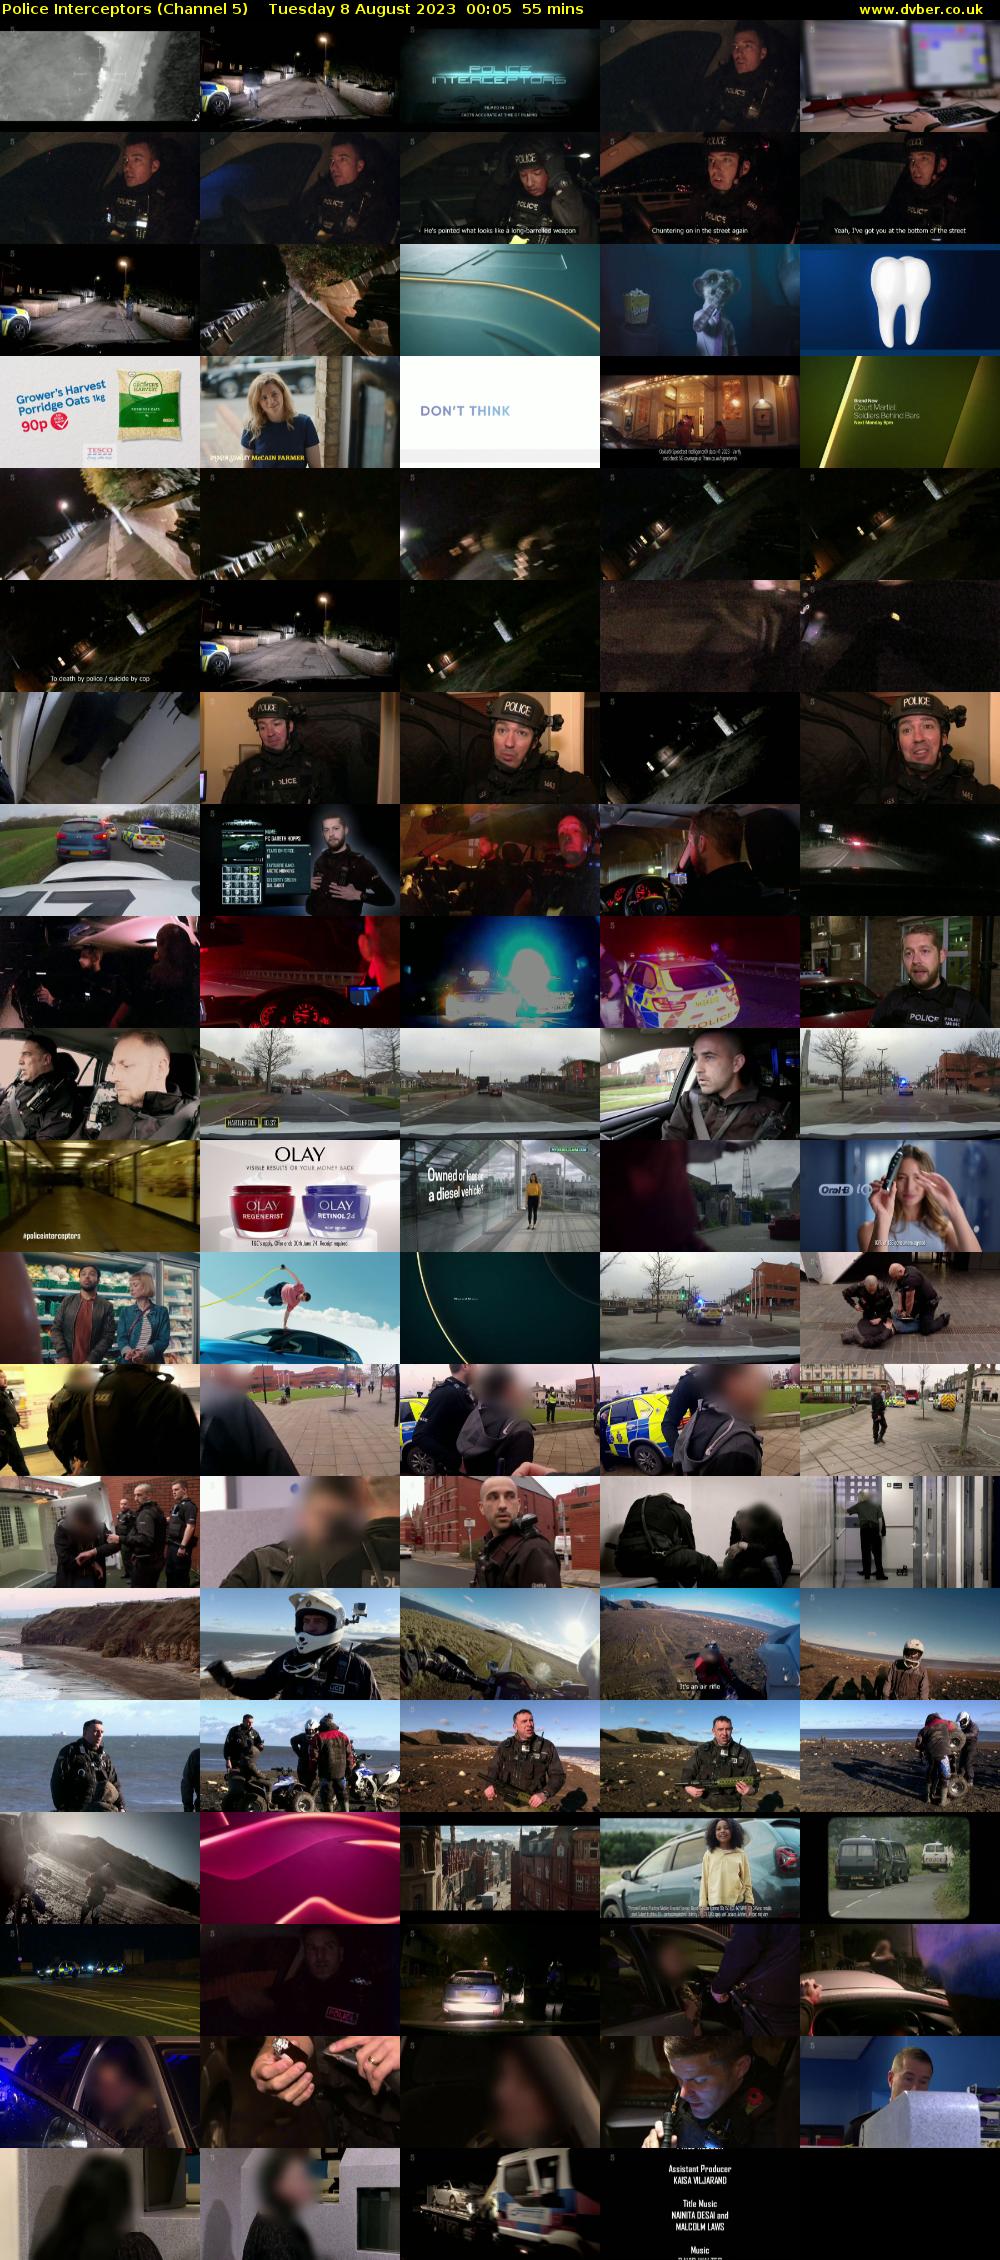 Police Interceptors (Channel 5) Tuesday 8 August 2023 00:05 - 01:00